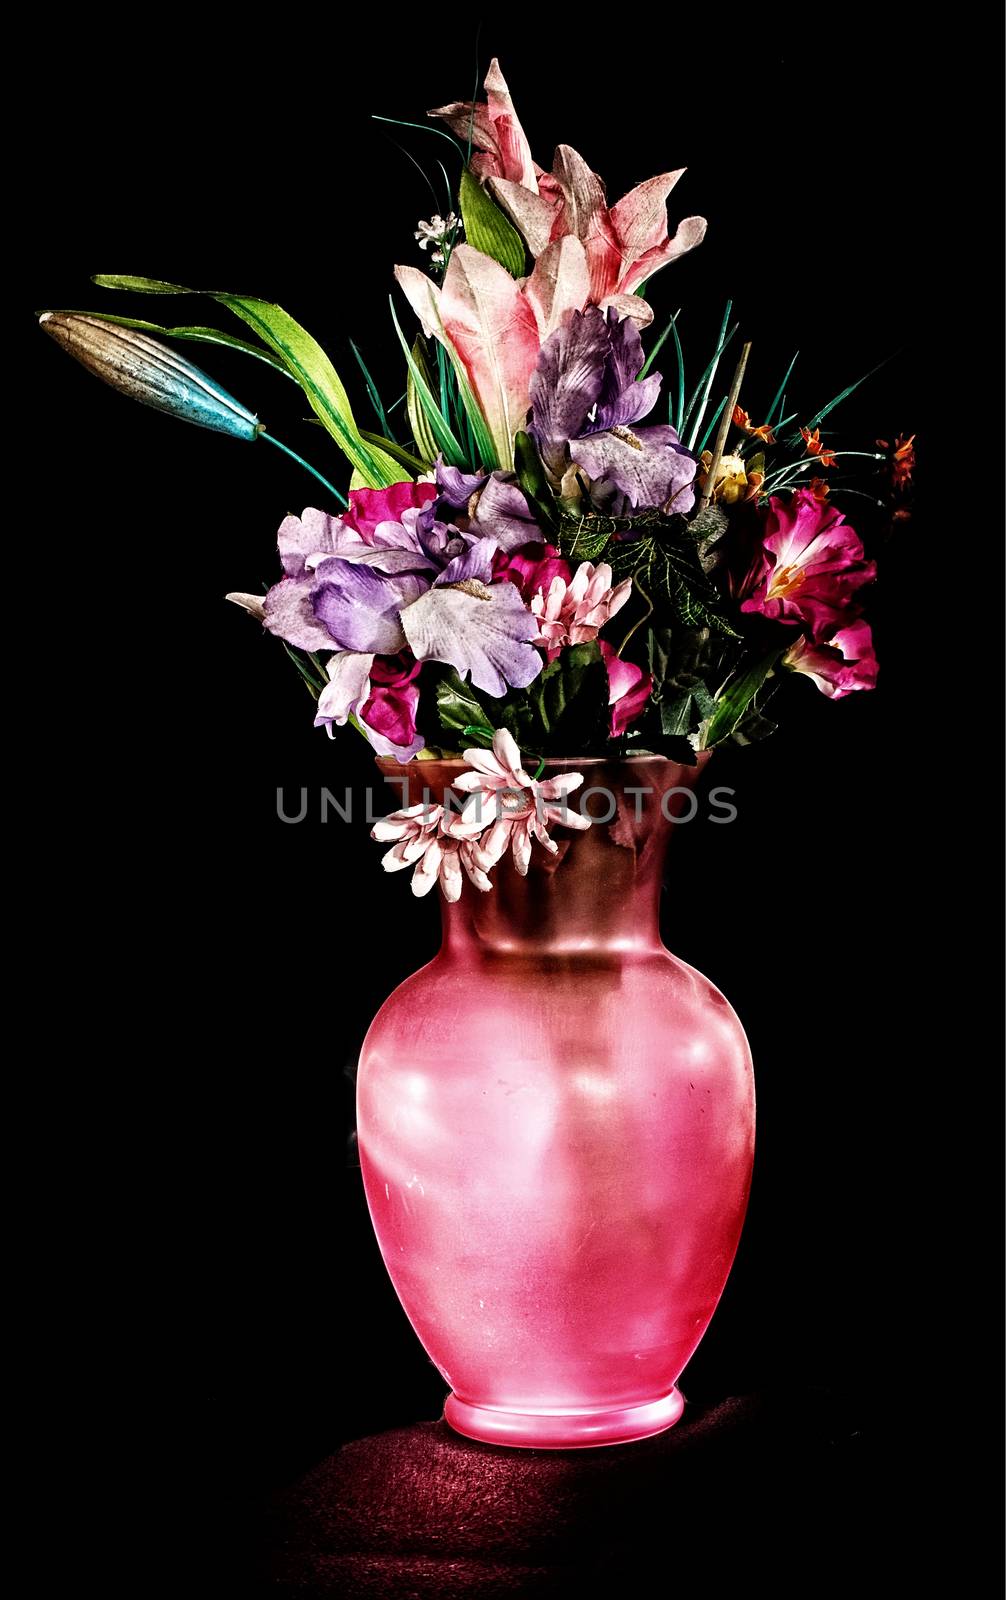 Vase with flowers by JRTBurr